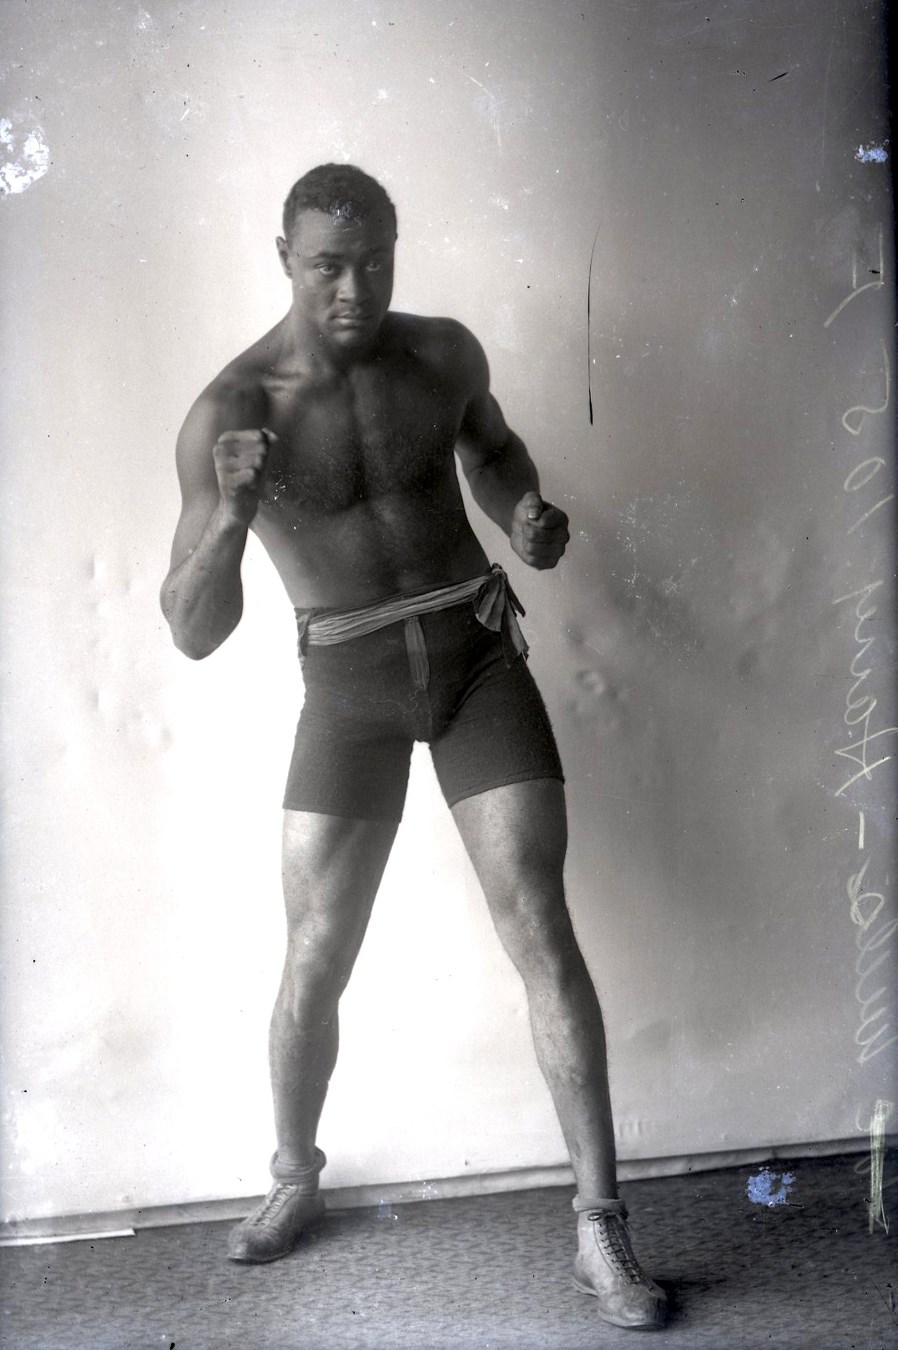 Dana Collection Of Important Boxing Negatives - 1910s Harry Wills "Black Panther" Boxing Pose Type I Glass Plate Negative by Dana Studio